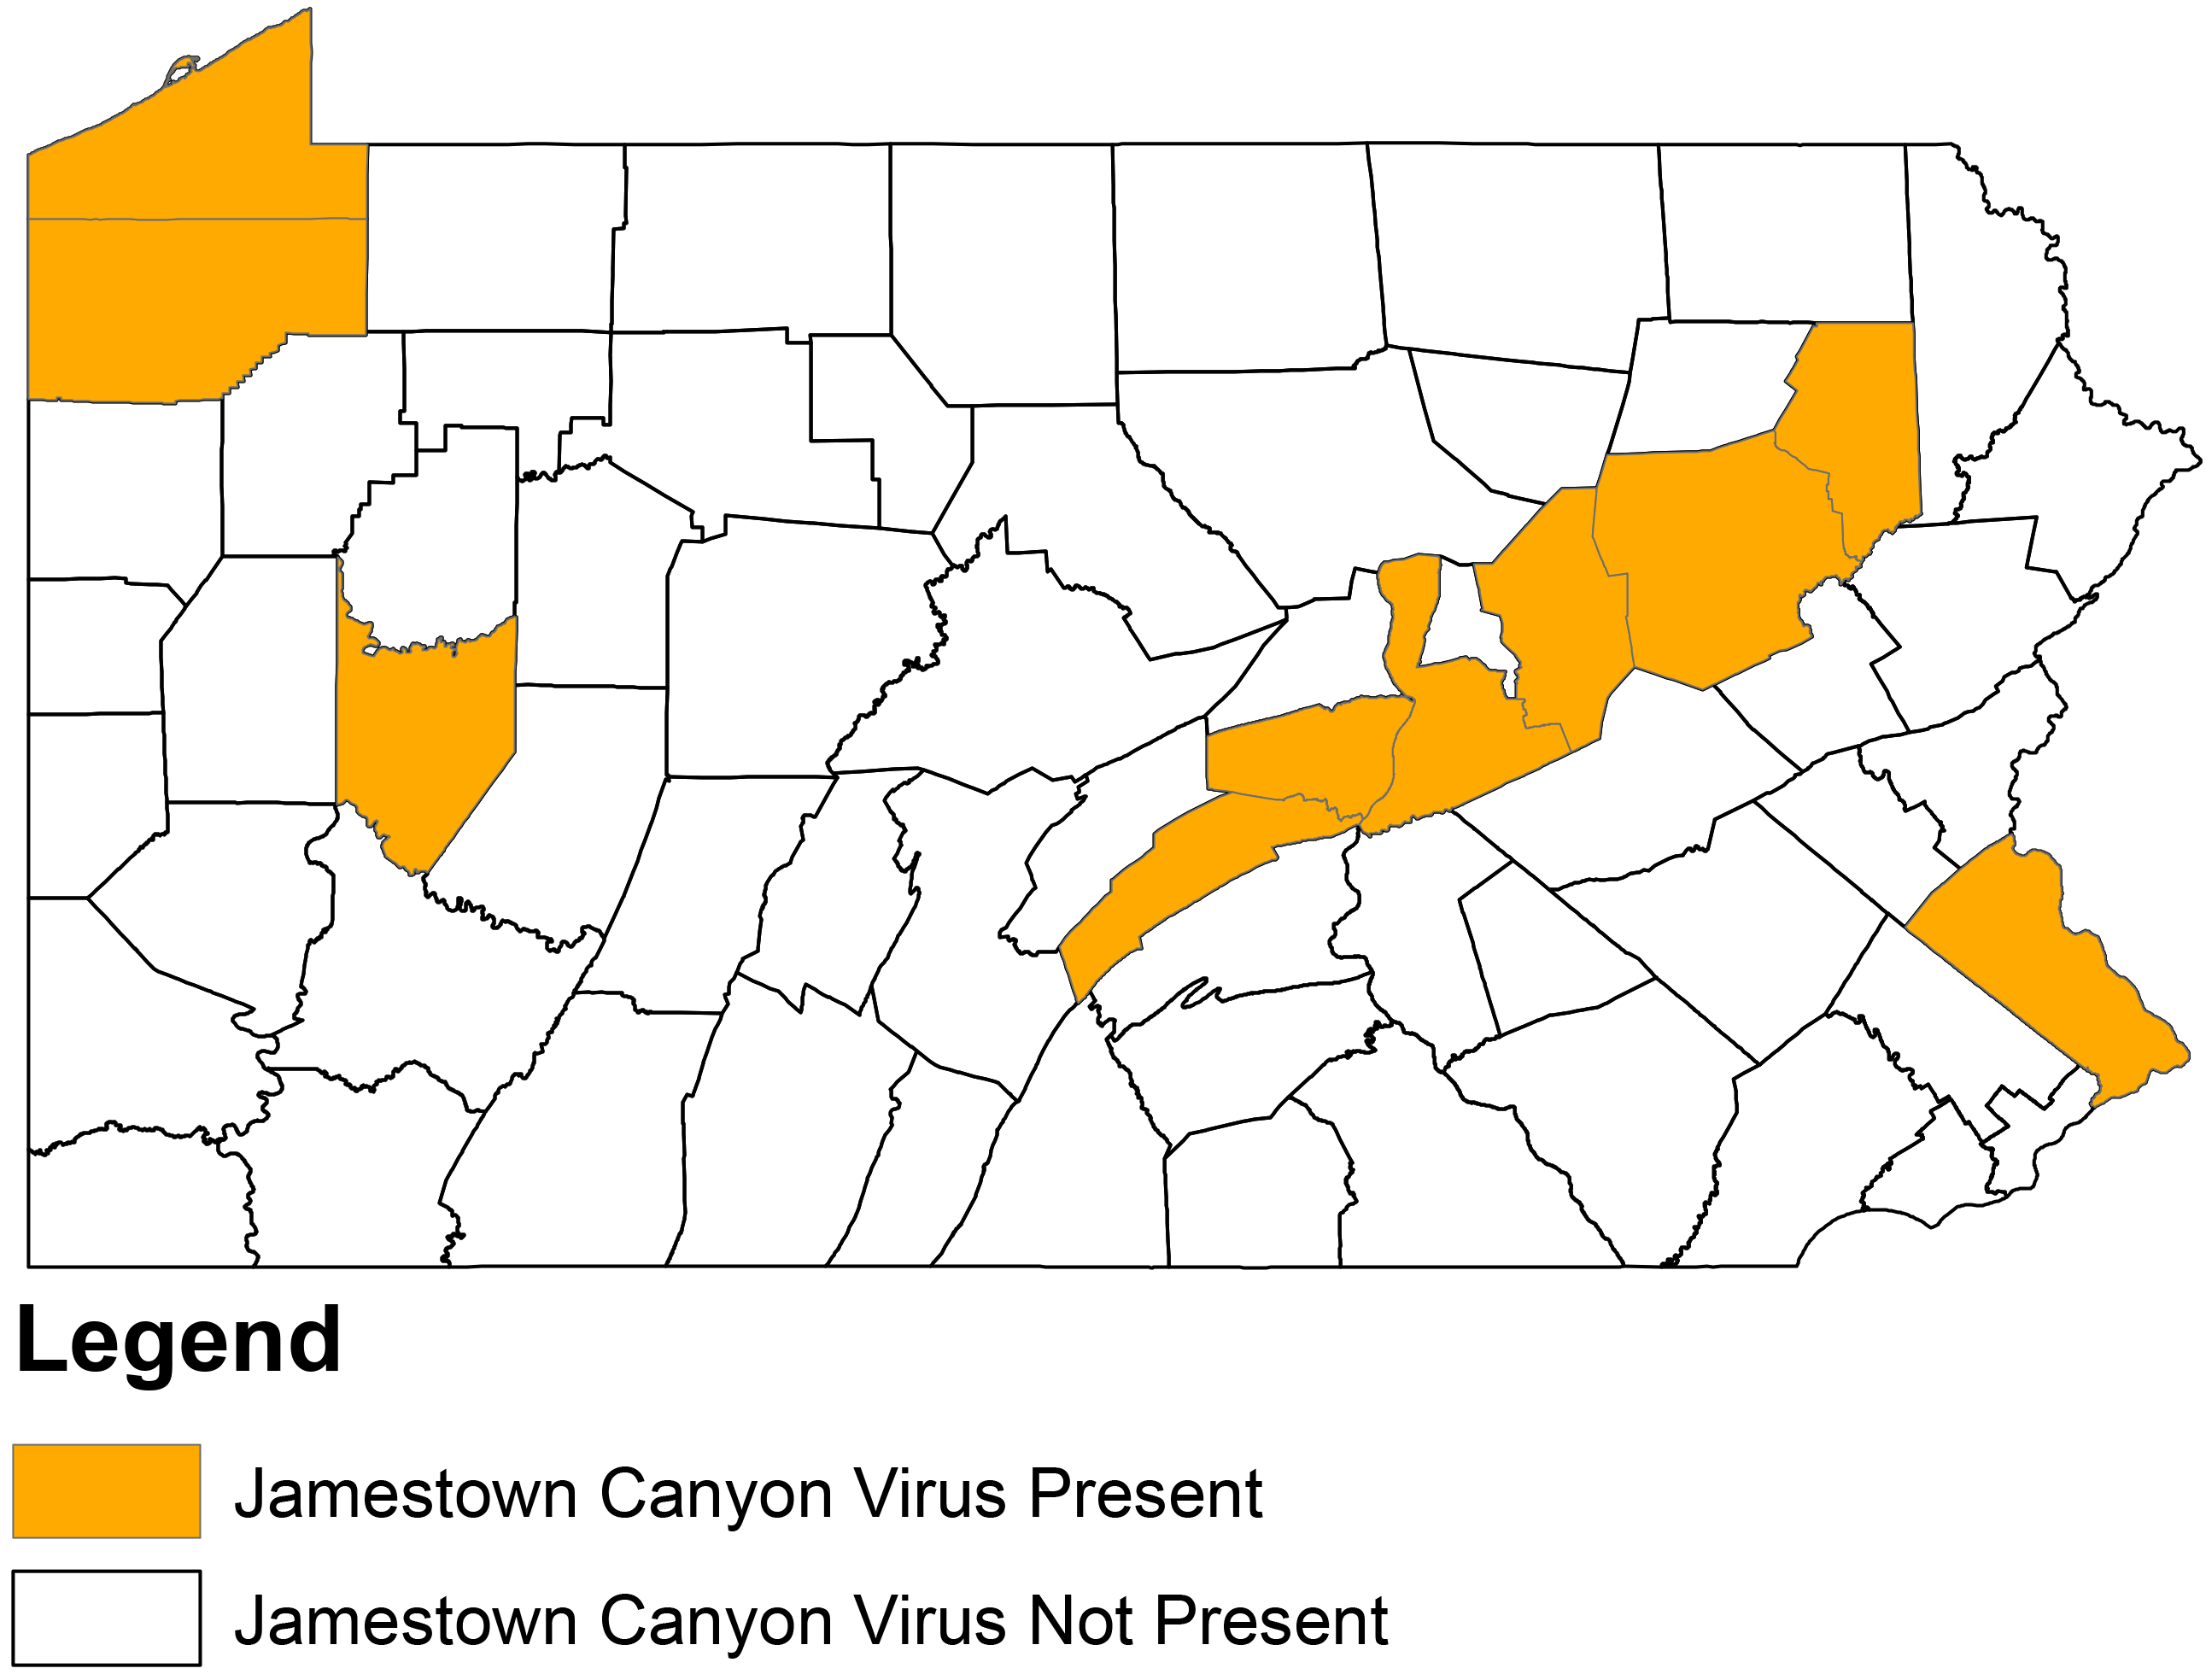 Map shows positive counties in yellow.